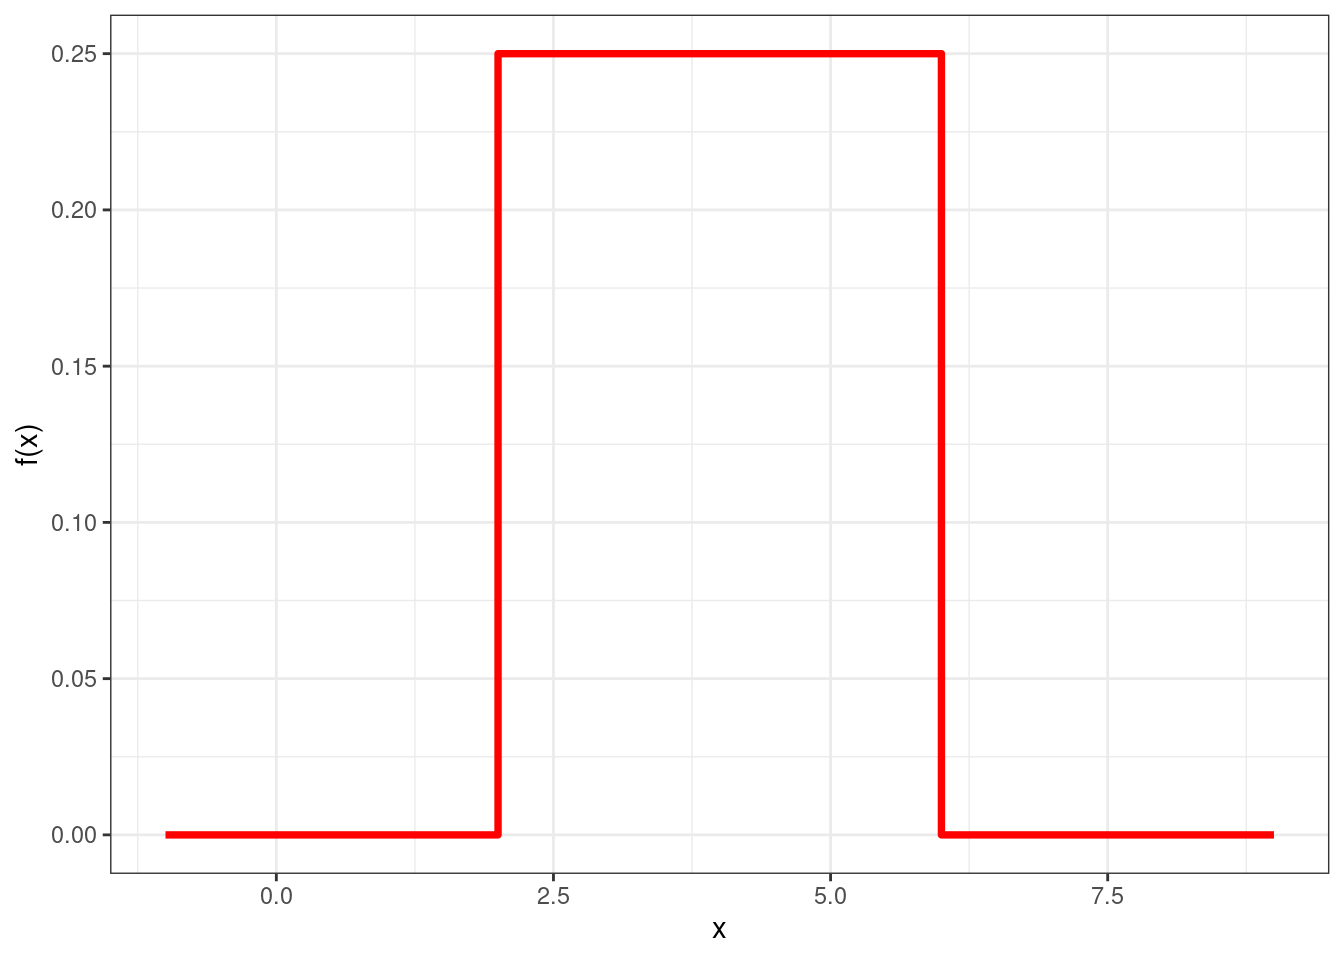 Probability density function for a uniform random variable with parameters a = 2 and b = 6